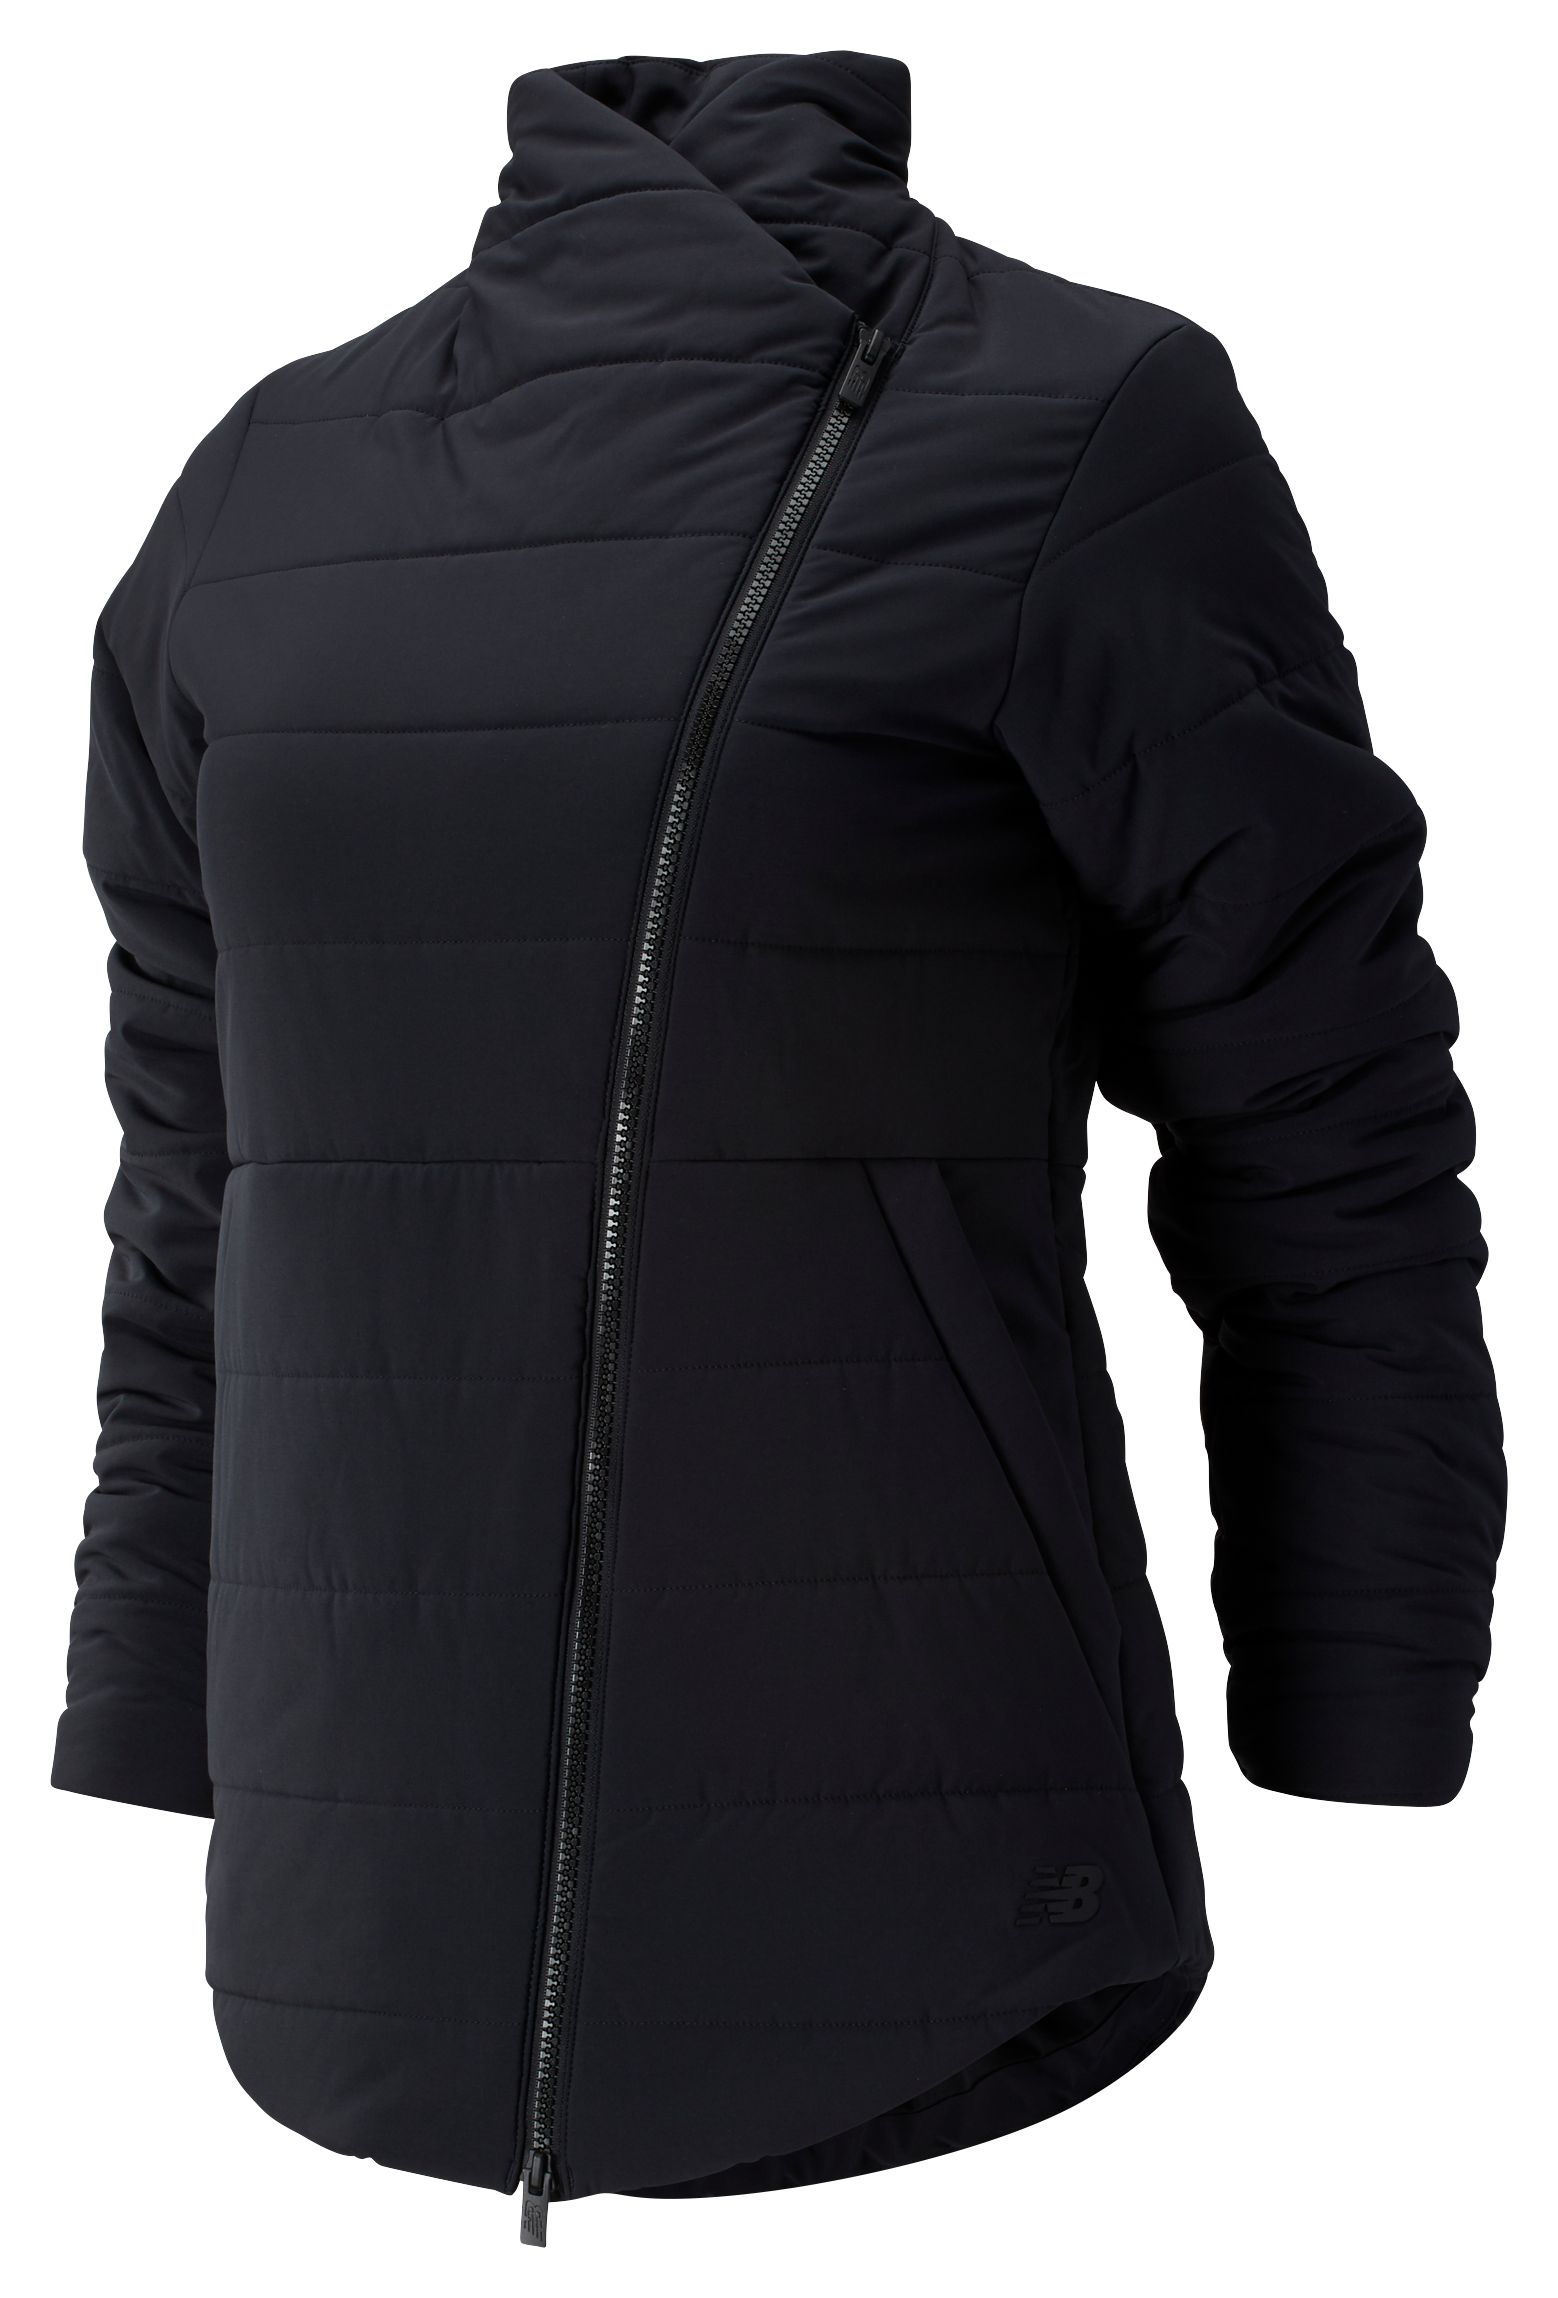 new balance women's asymetrical cold weather jacket